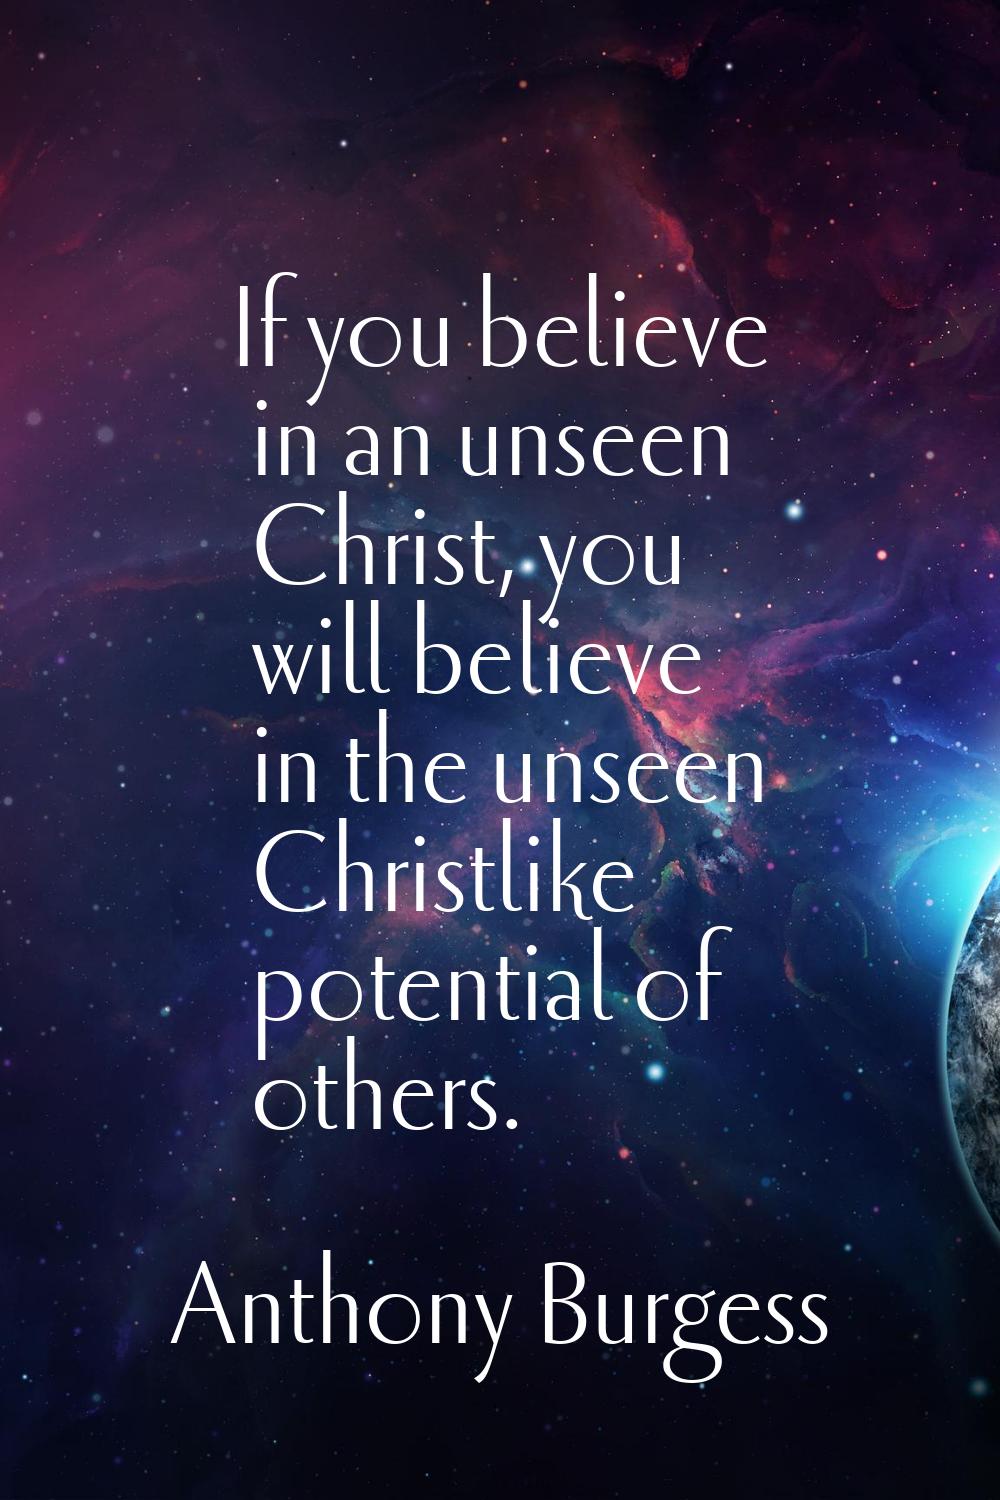 If you believe in an unseen Christ, you will believe in the unseen Christlike potential of others.